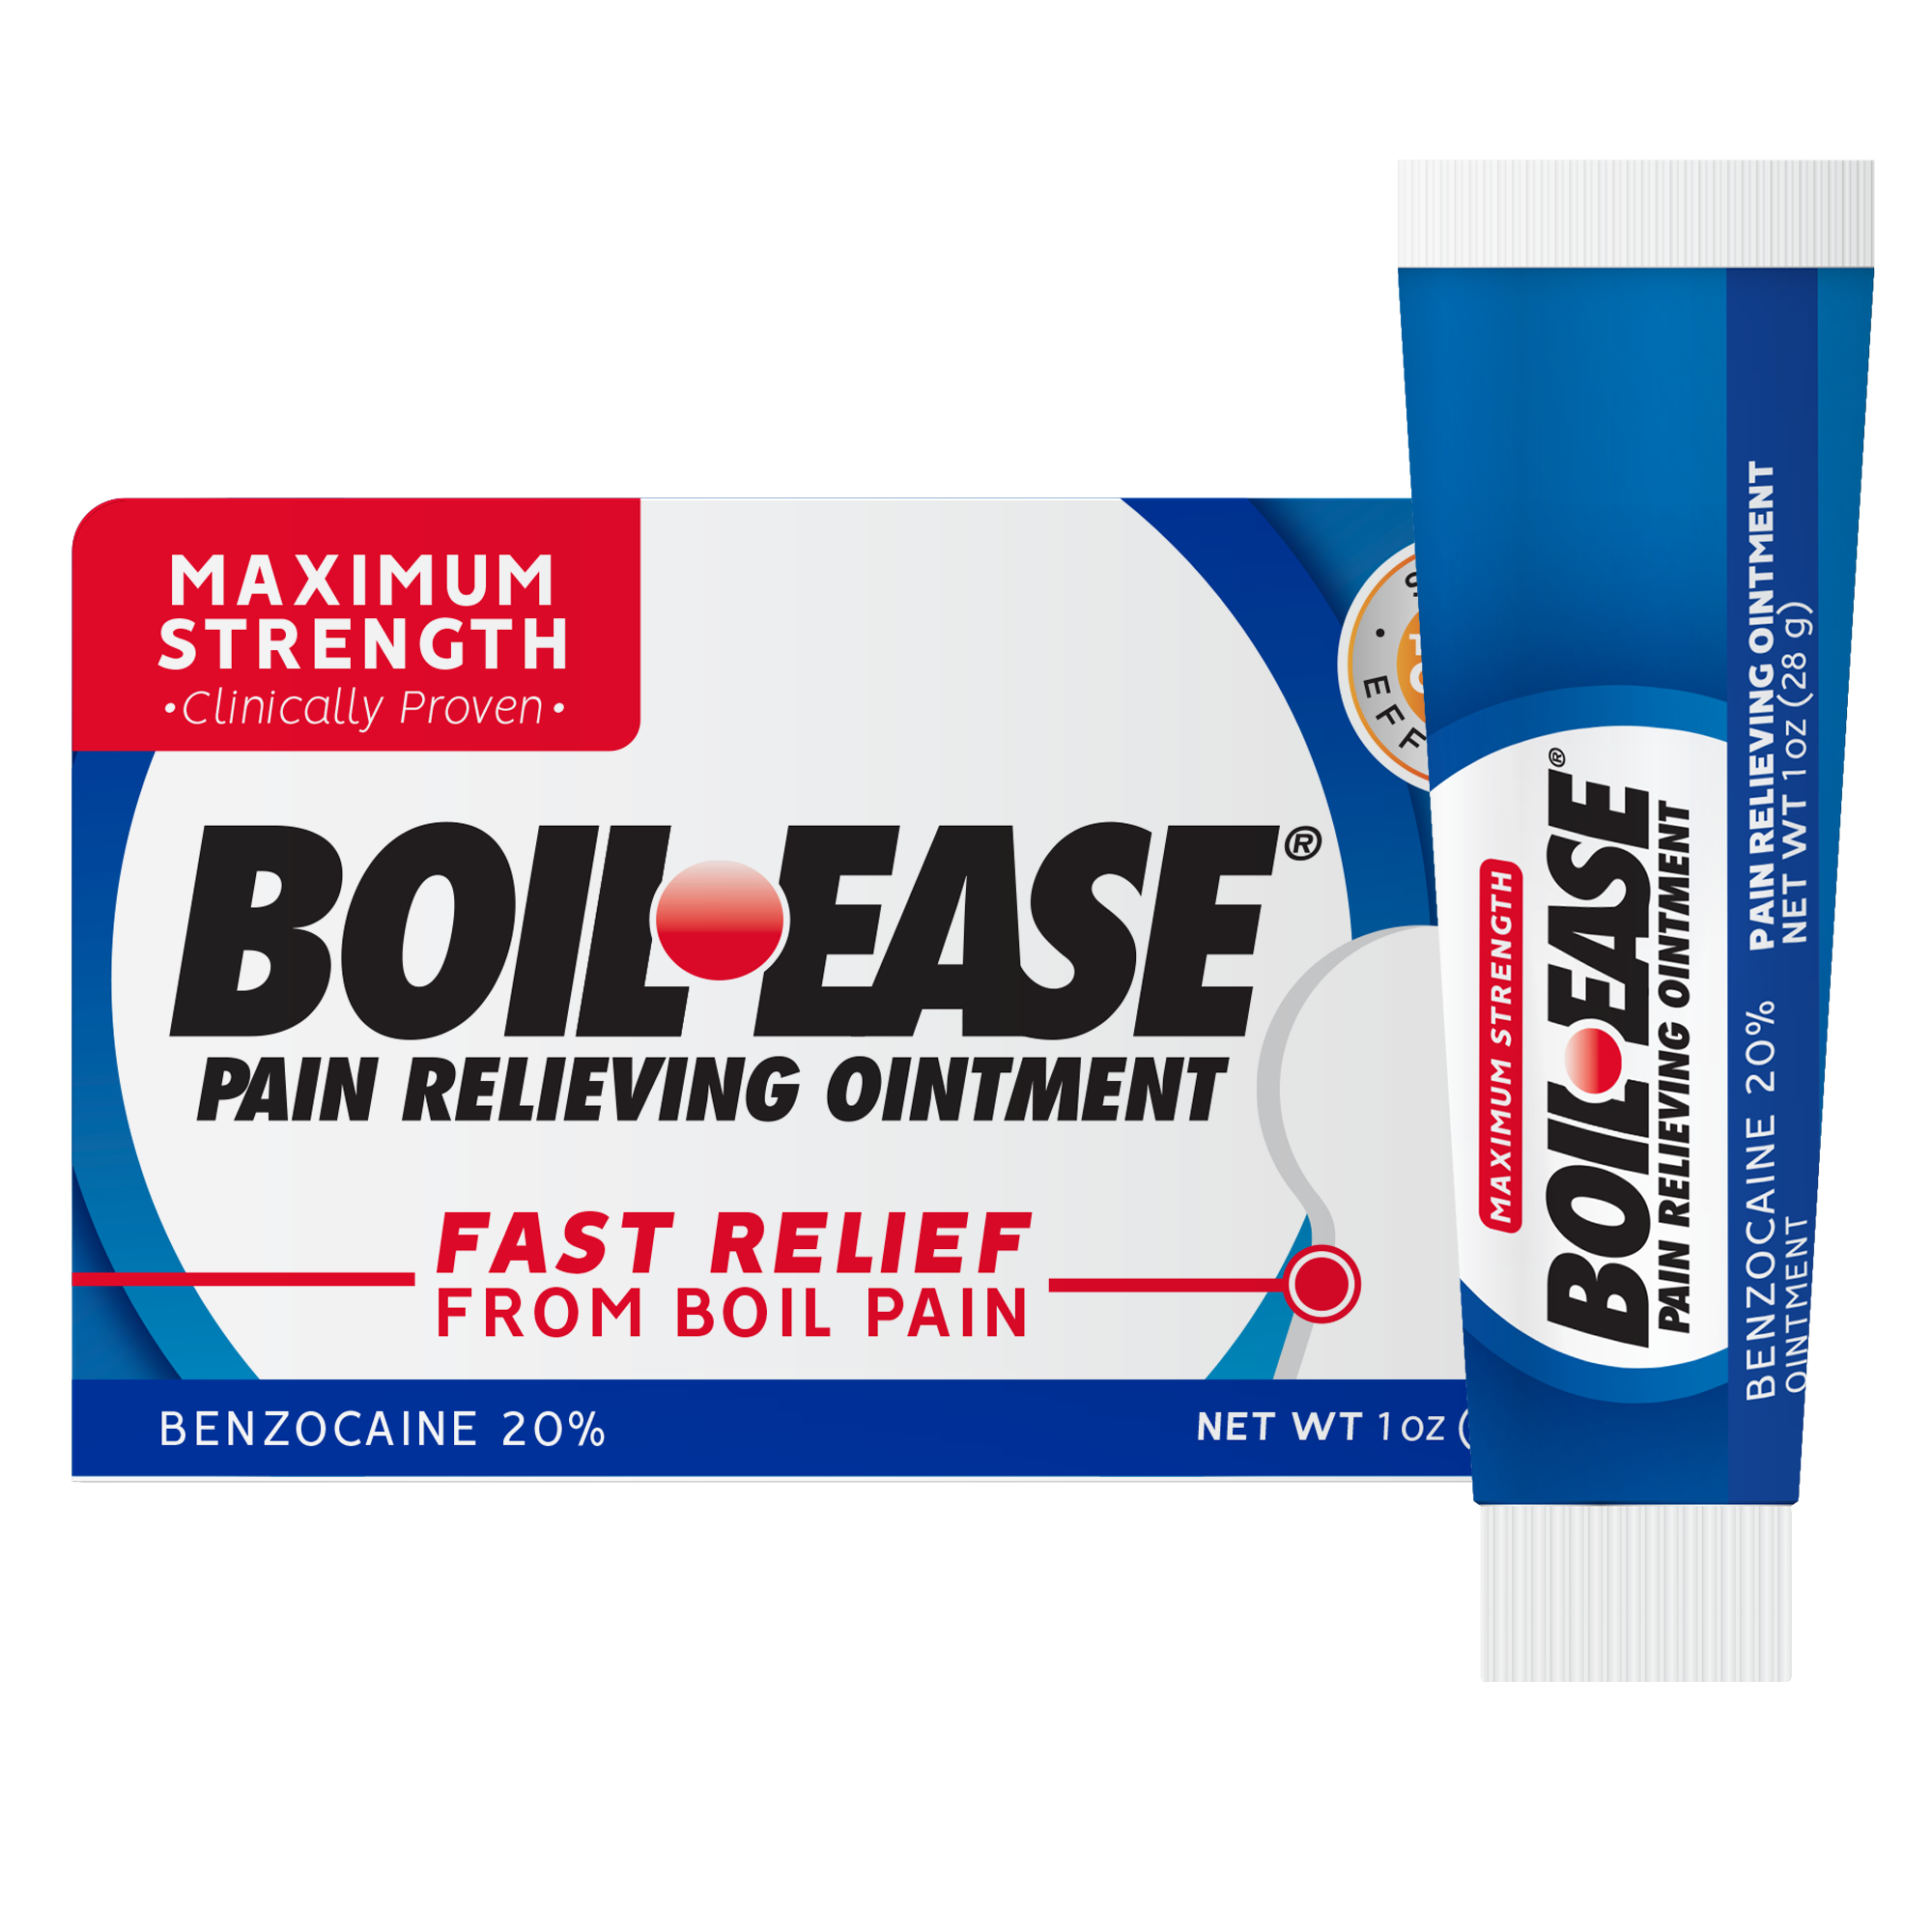 Boil-Ease Maximum Strength Pain Relieving Ointment, 1 Oz - image 1 of 11